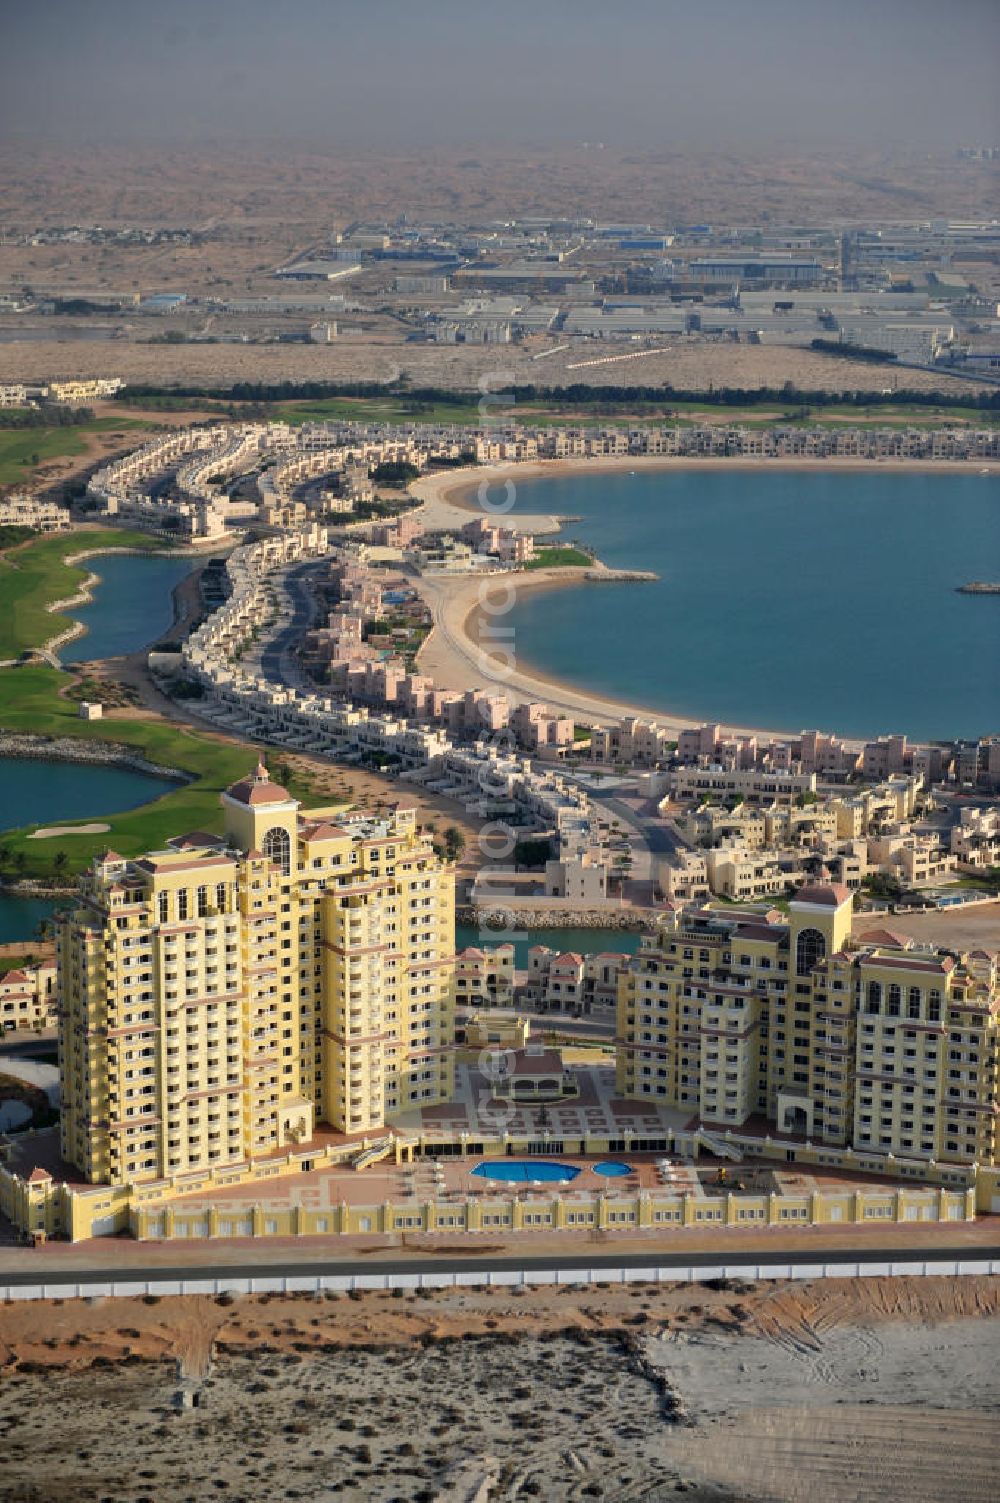 Aerial photograph Ras Al Khaimah - Complex of Royal Breeze Residence in the arab emirate Ras Al Khaimah. The complex is part of the Al Hamra Village Project, the second largest construction project of Ras Al Khaimah and consists of apartments, penthouses, swimming pools and gardens. The project is realized by the state-owned company Al Hamra Real Estate